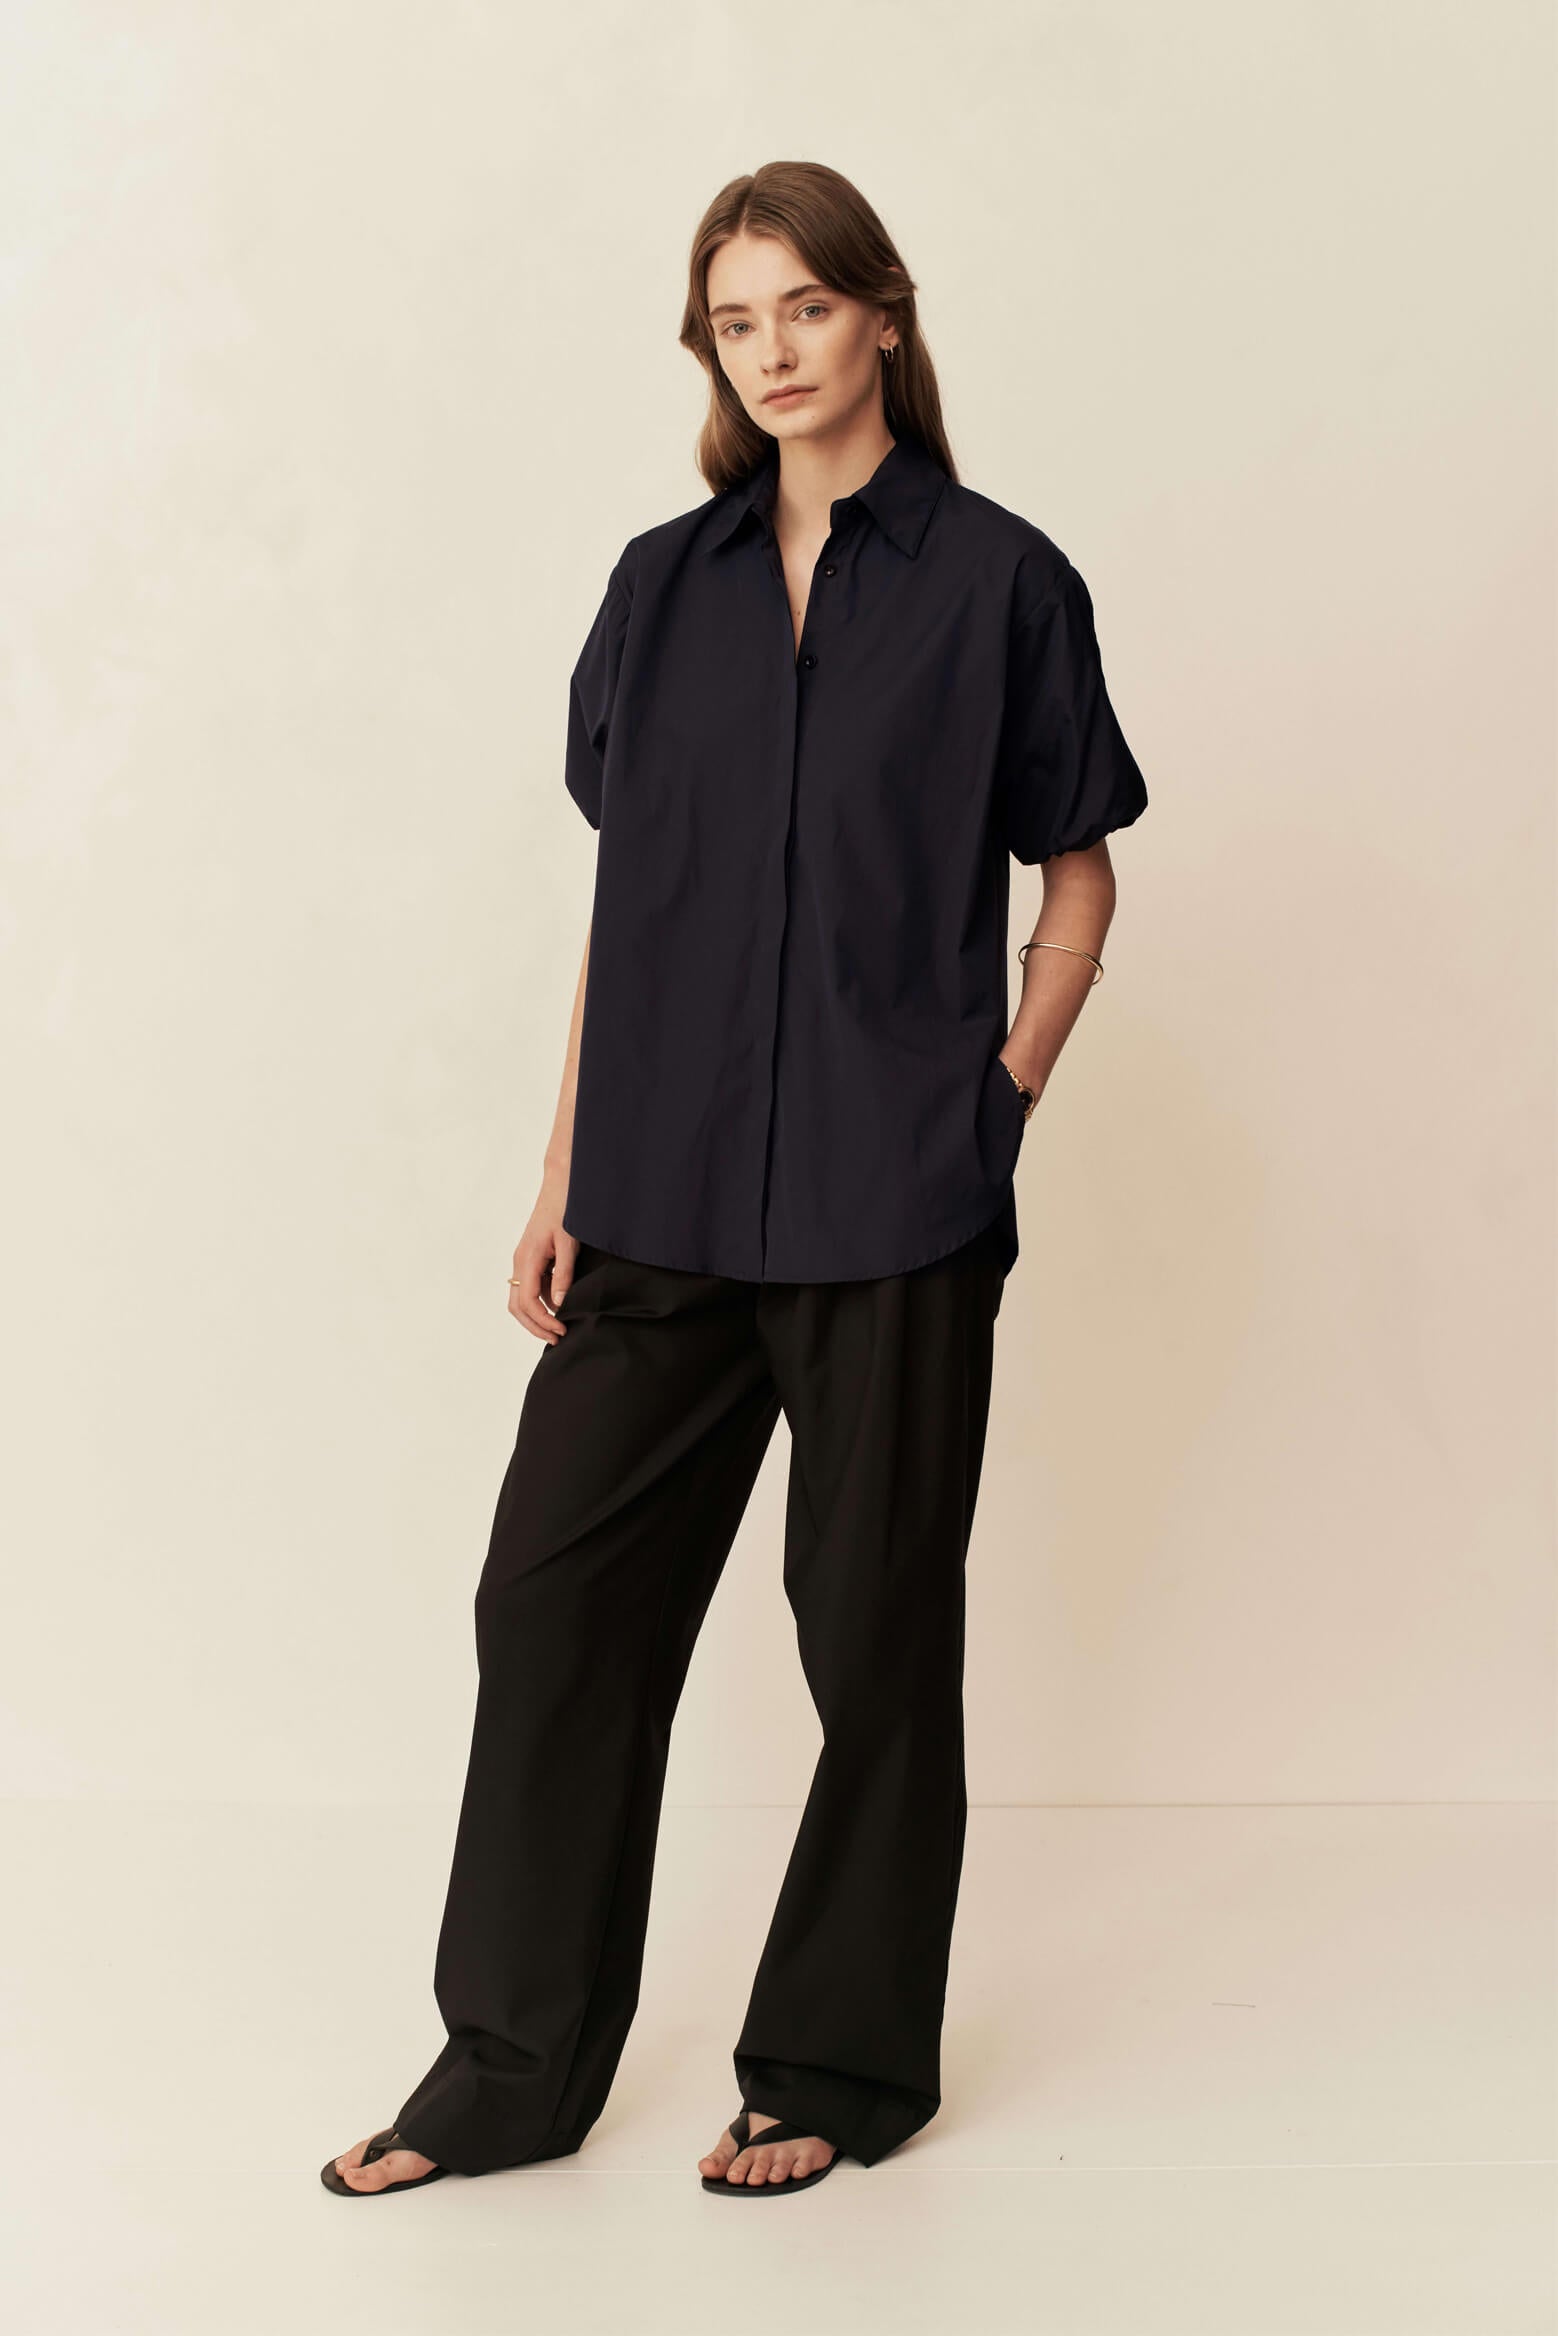 Esse Collected Short Sleeve Shirt in French Navy from The New Trend